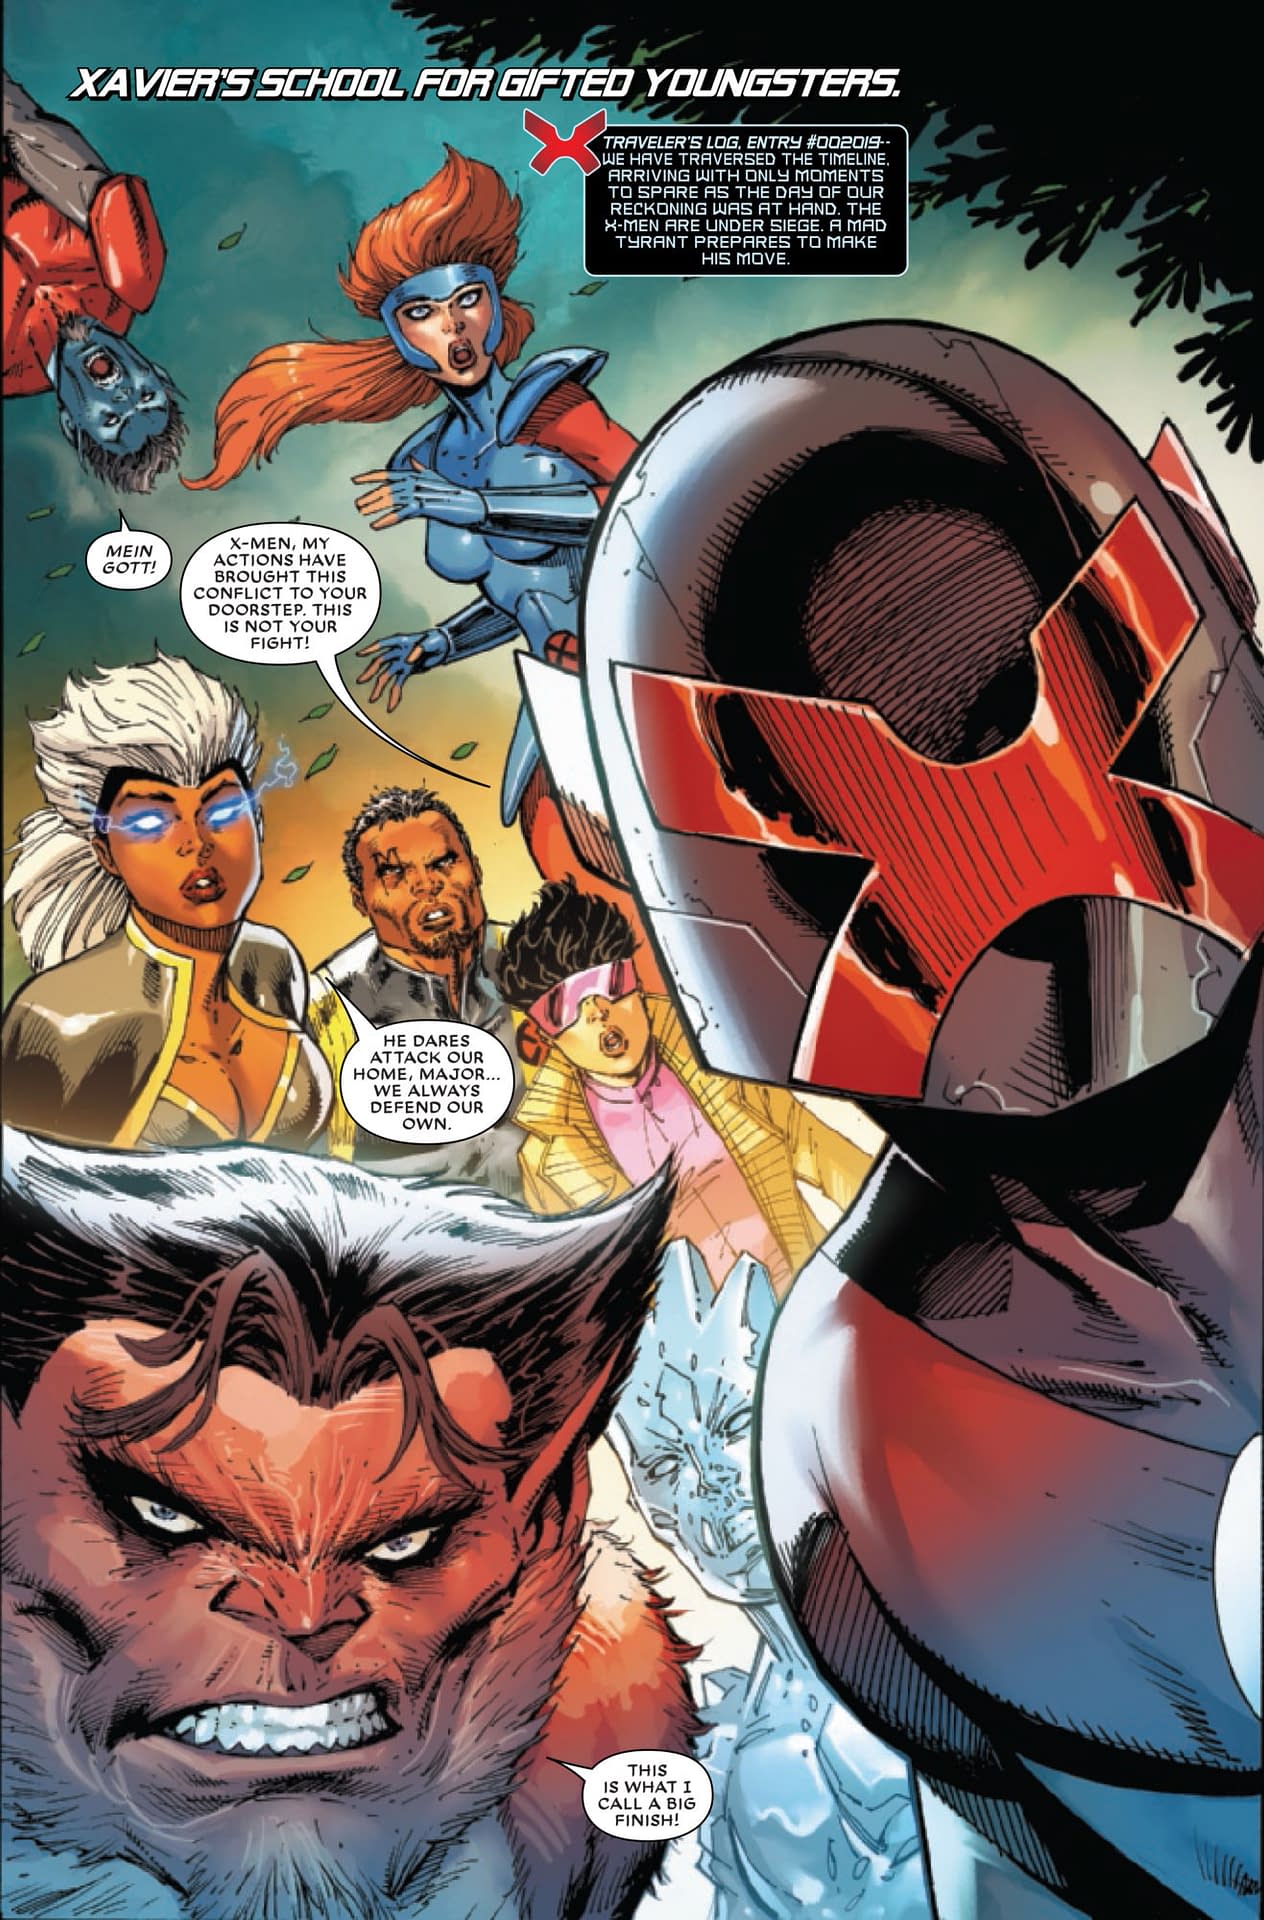 Deadpool Joins the Fight... But on Whose Side? Major X #6 Preview